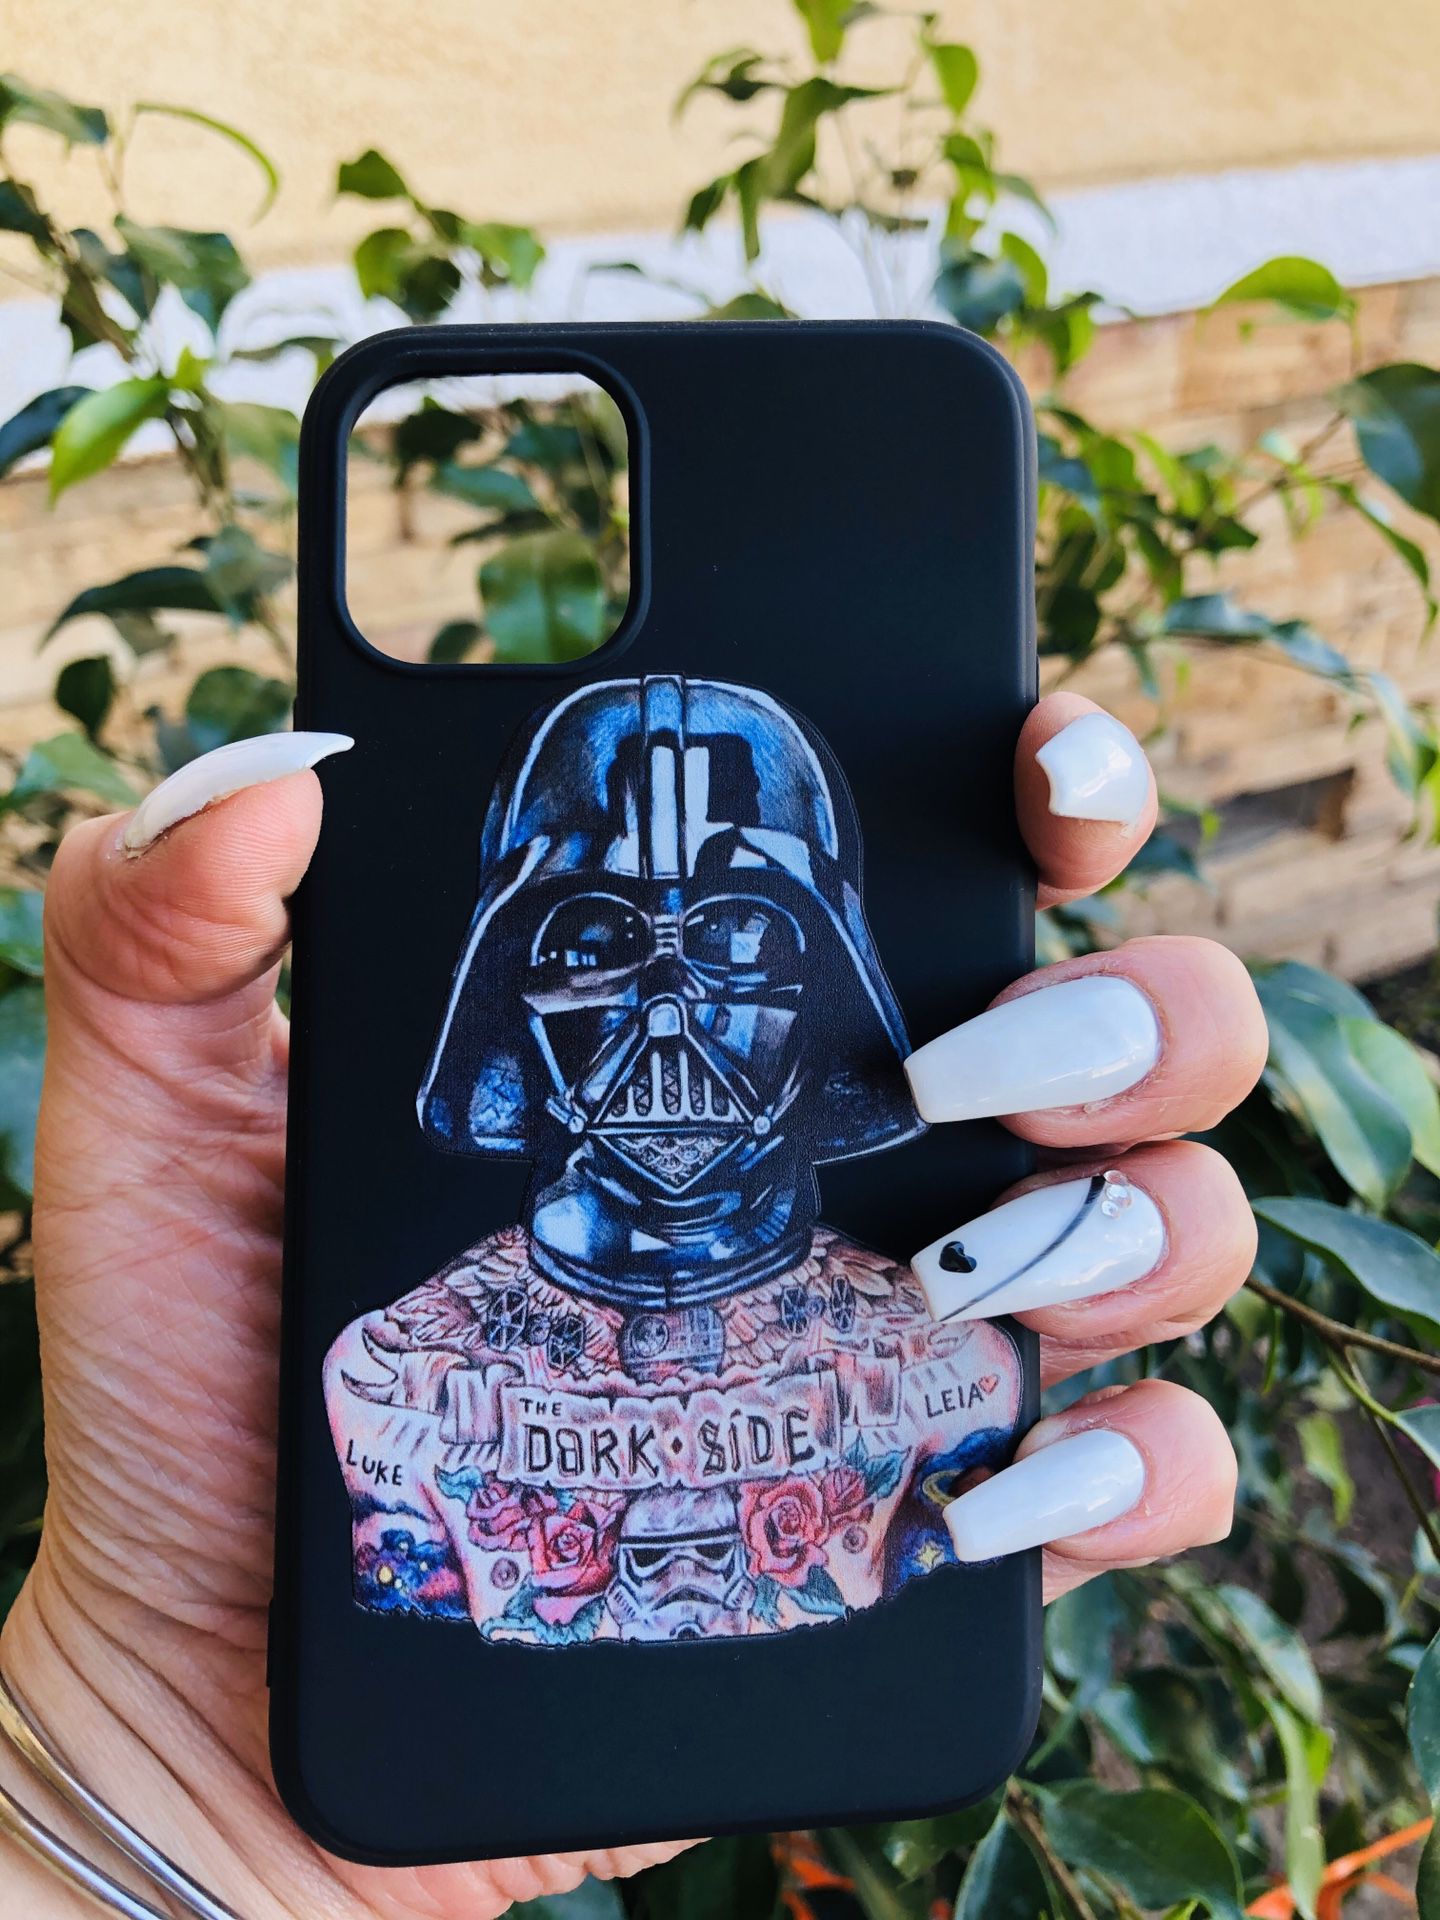 Brand new cool iphone 11 PRO case cover rubber star wars Vader cartoon tattoo hip hop fire rap trill mens guys womens hypebeast hype swag